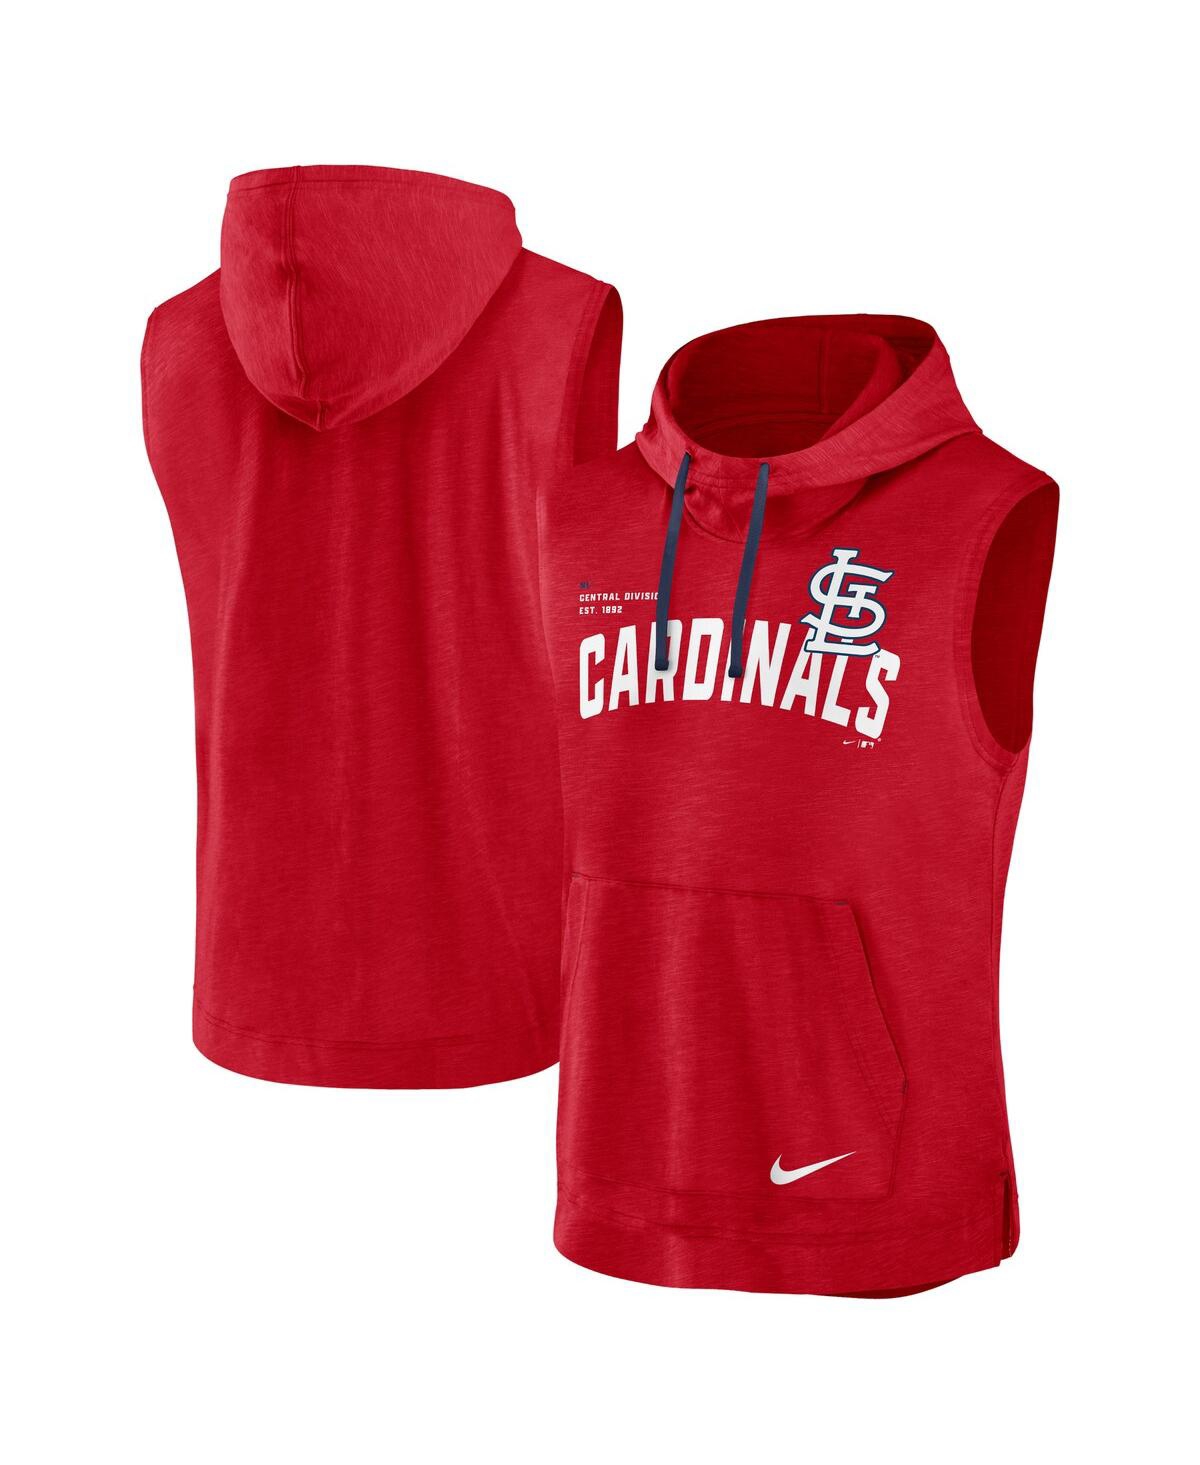 Shop Nike Men's  Red St. Louis Cardinals Athletic Sleeveless Hooded T-shirt